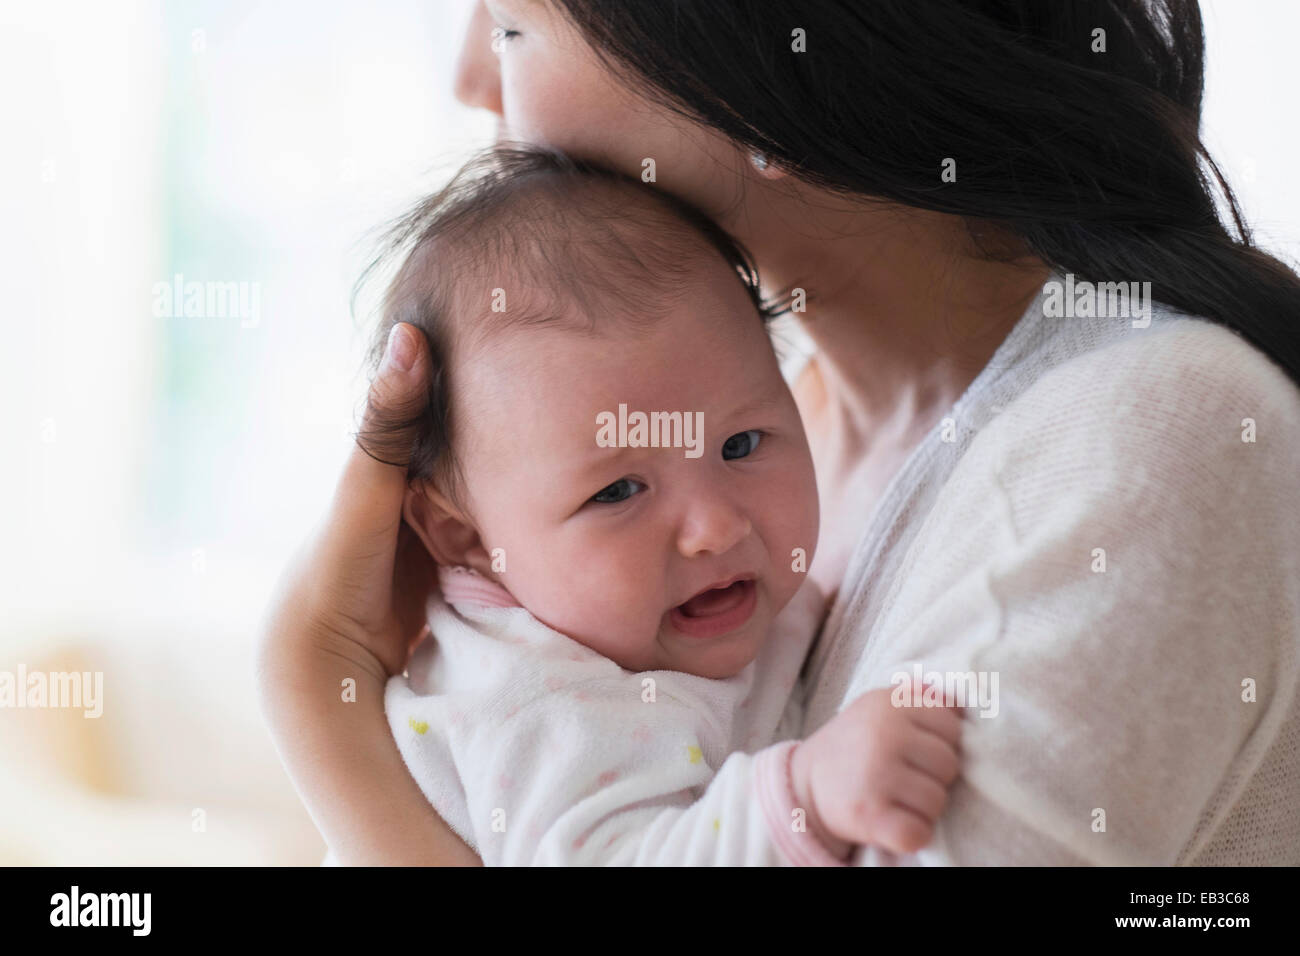 Asian mother comforting crying baby Stock Photo